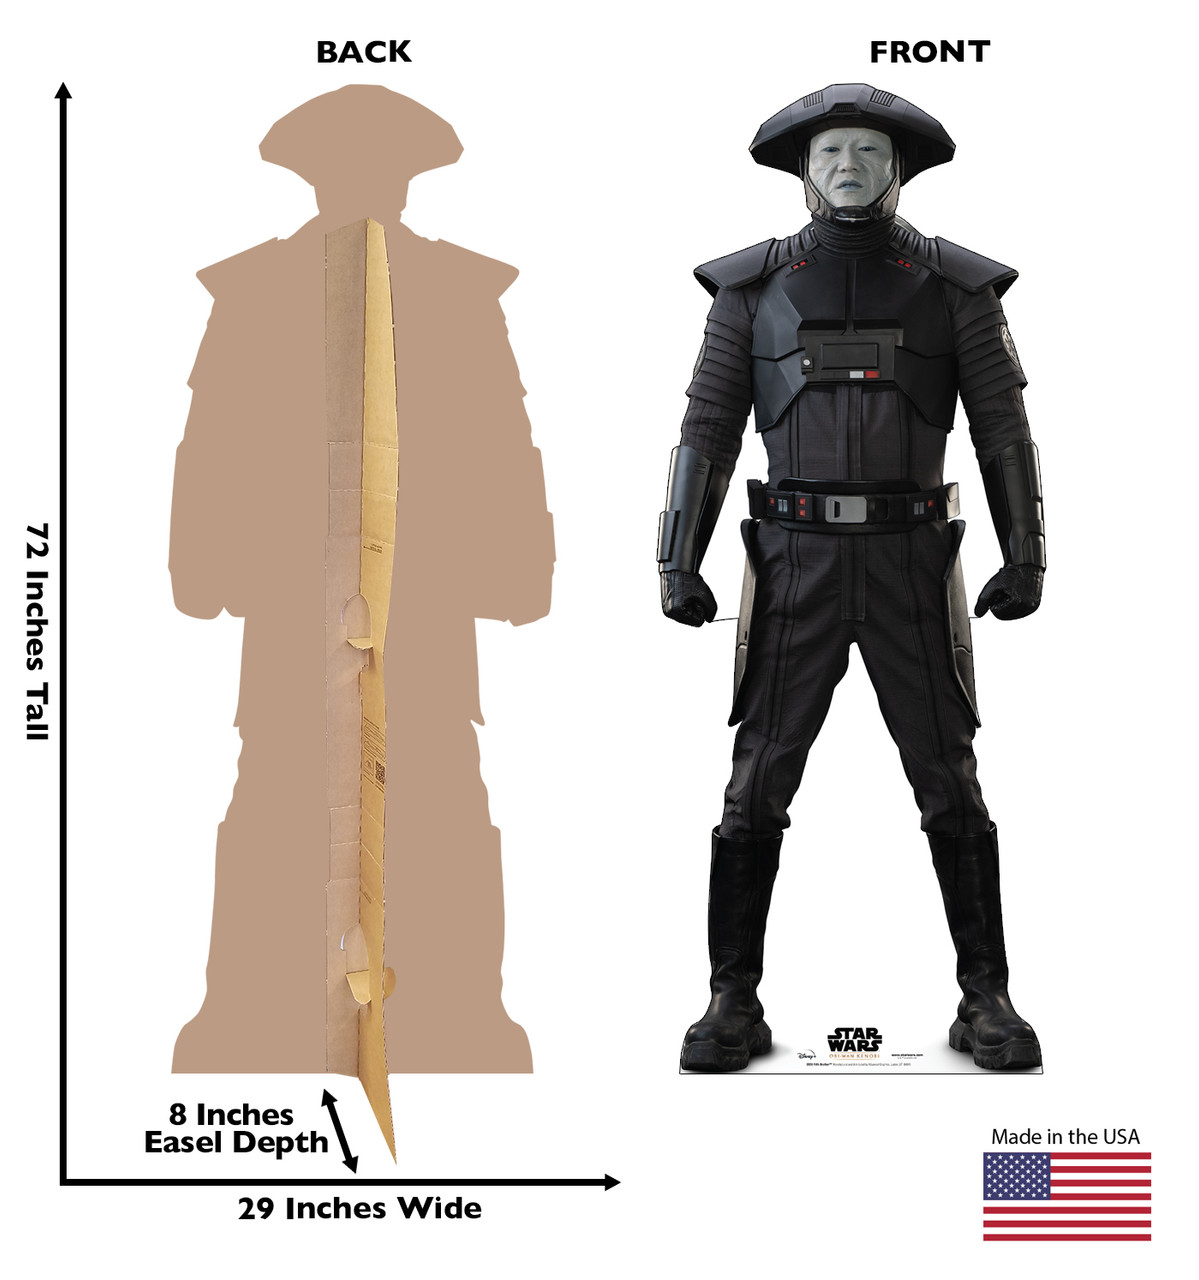 Life-size cardboard standee of Fith Brother from Star Wars Obi-Wan Kenobi Series on Disney Plus with back and front dimensions.